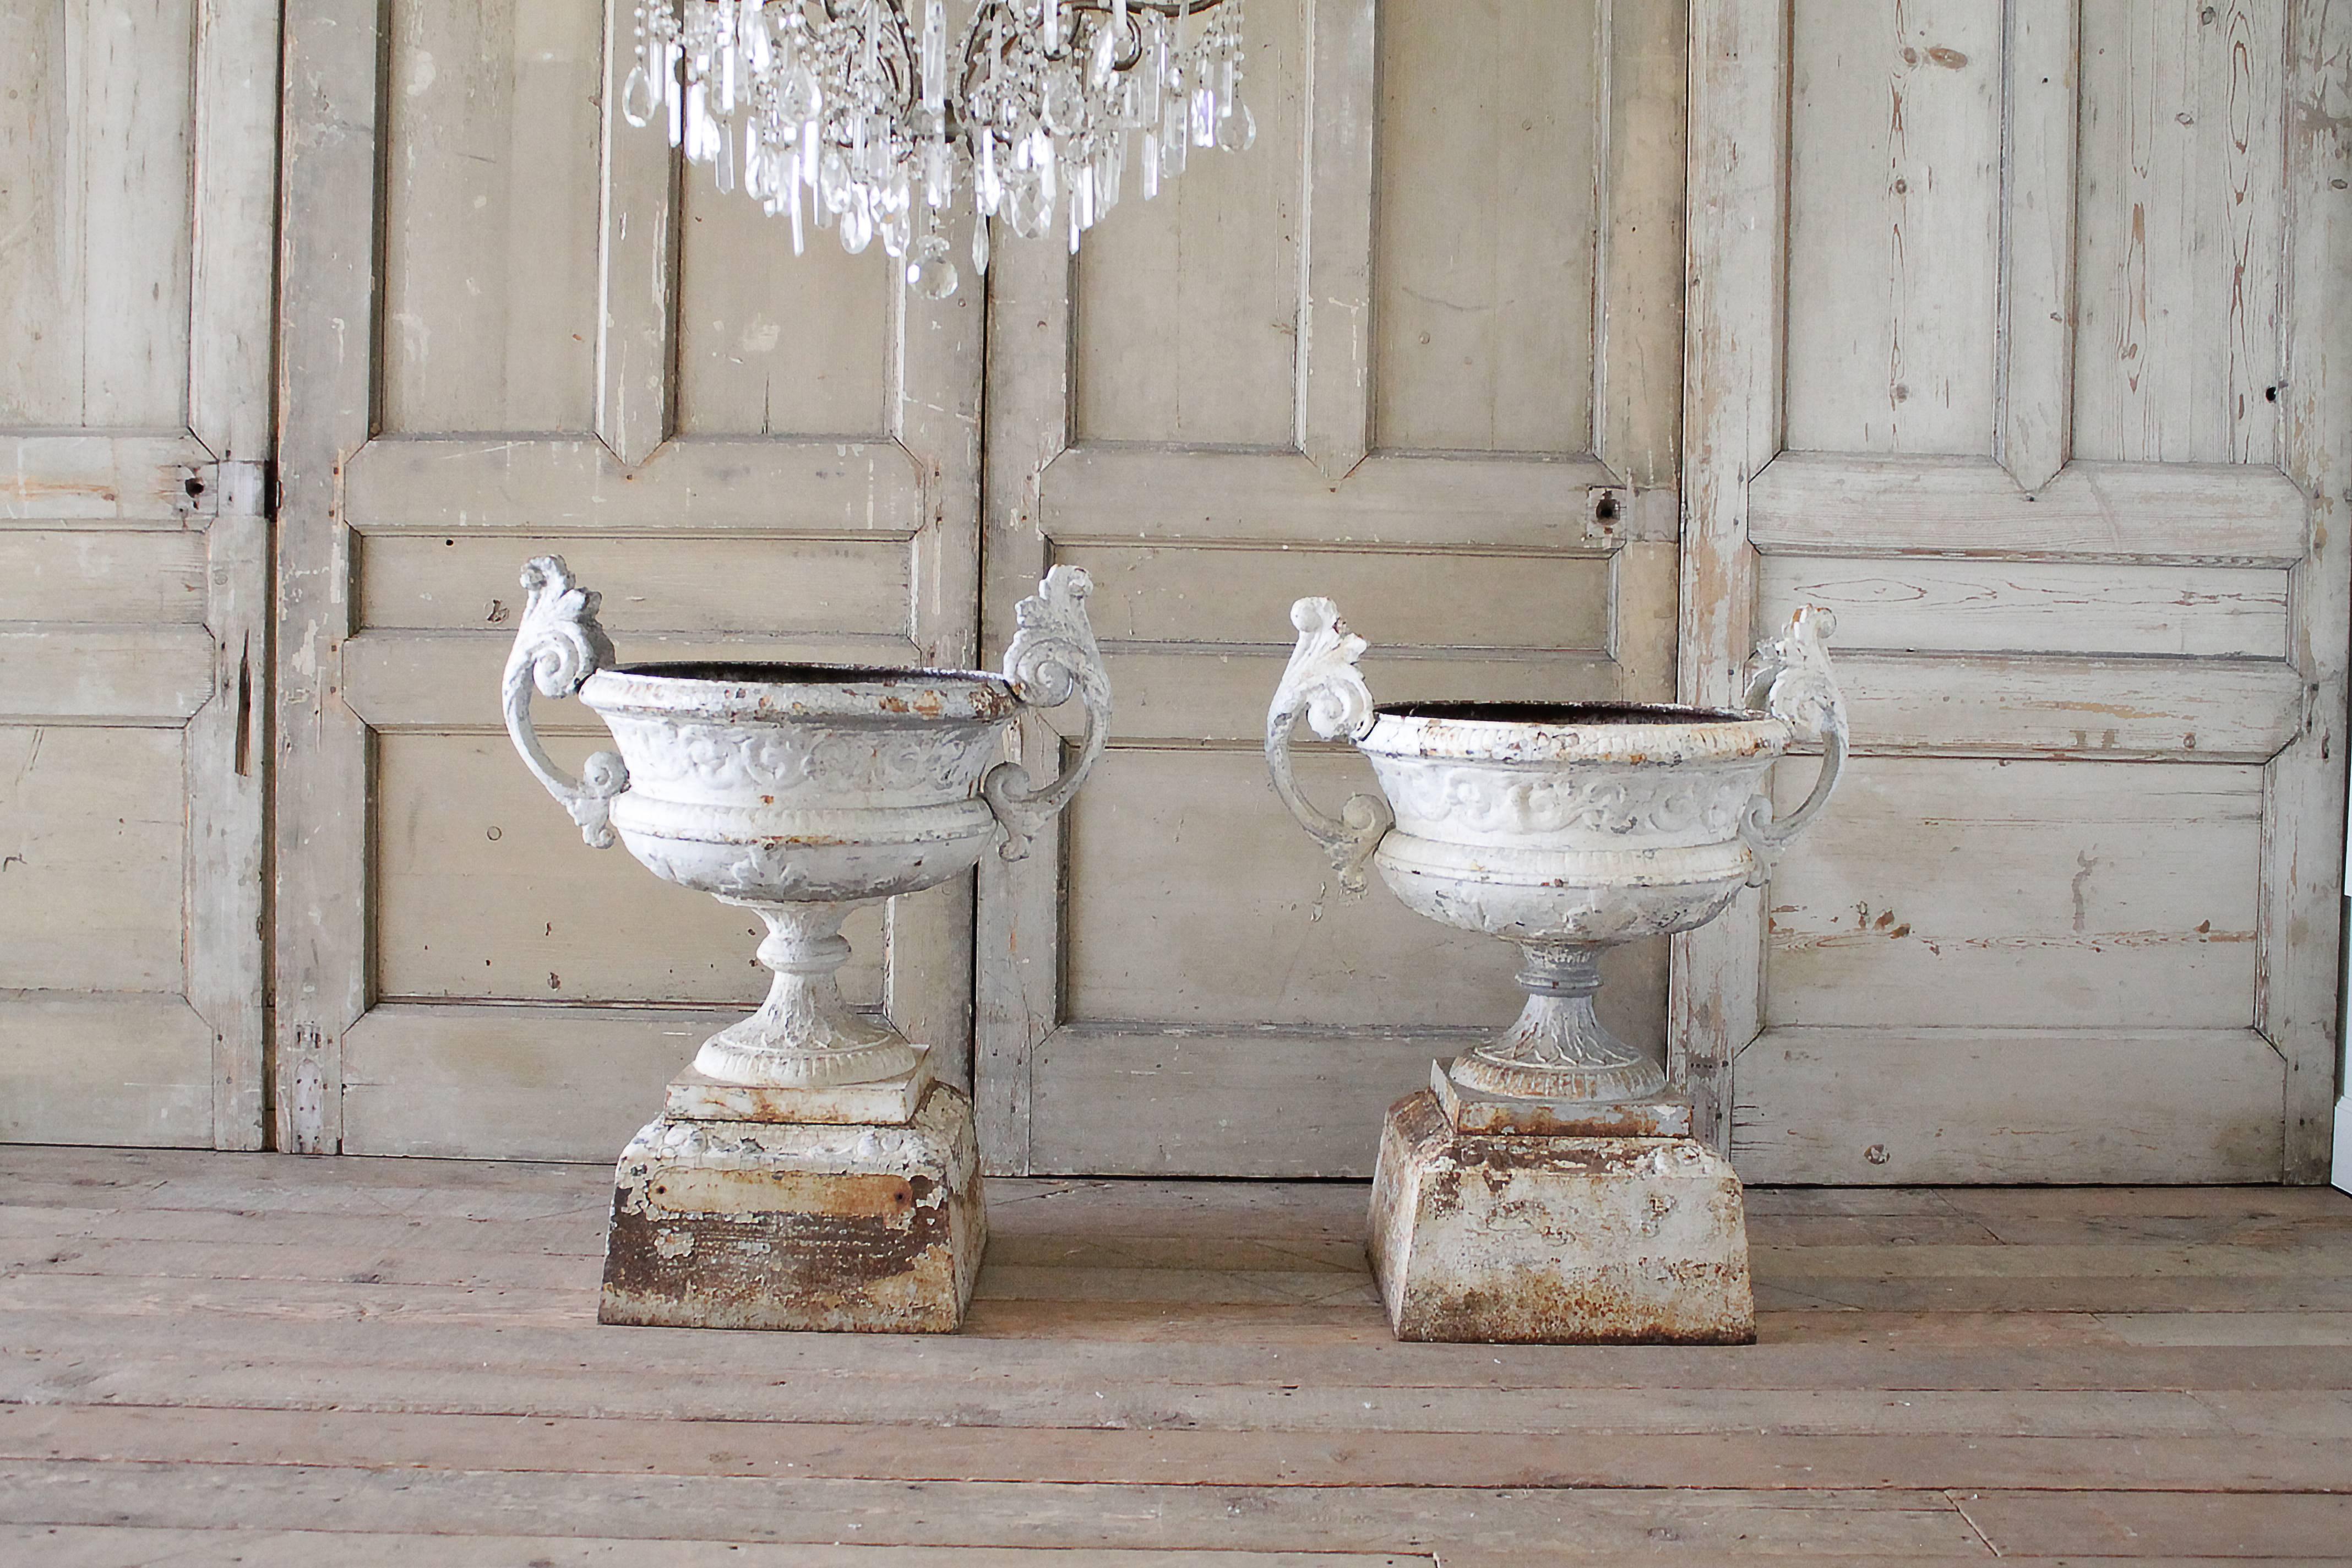 Beautiful pair of cast iron urns with handles. These come apart into three pieces, when stacked they are very sturdy and feel as if they are one piece. Perfectly aged paint peeling and chipping. One urn has a crack, however it is still solid and